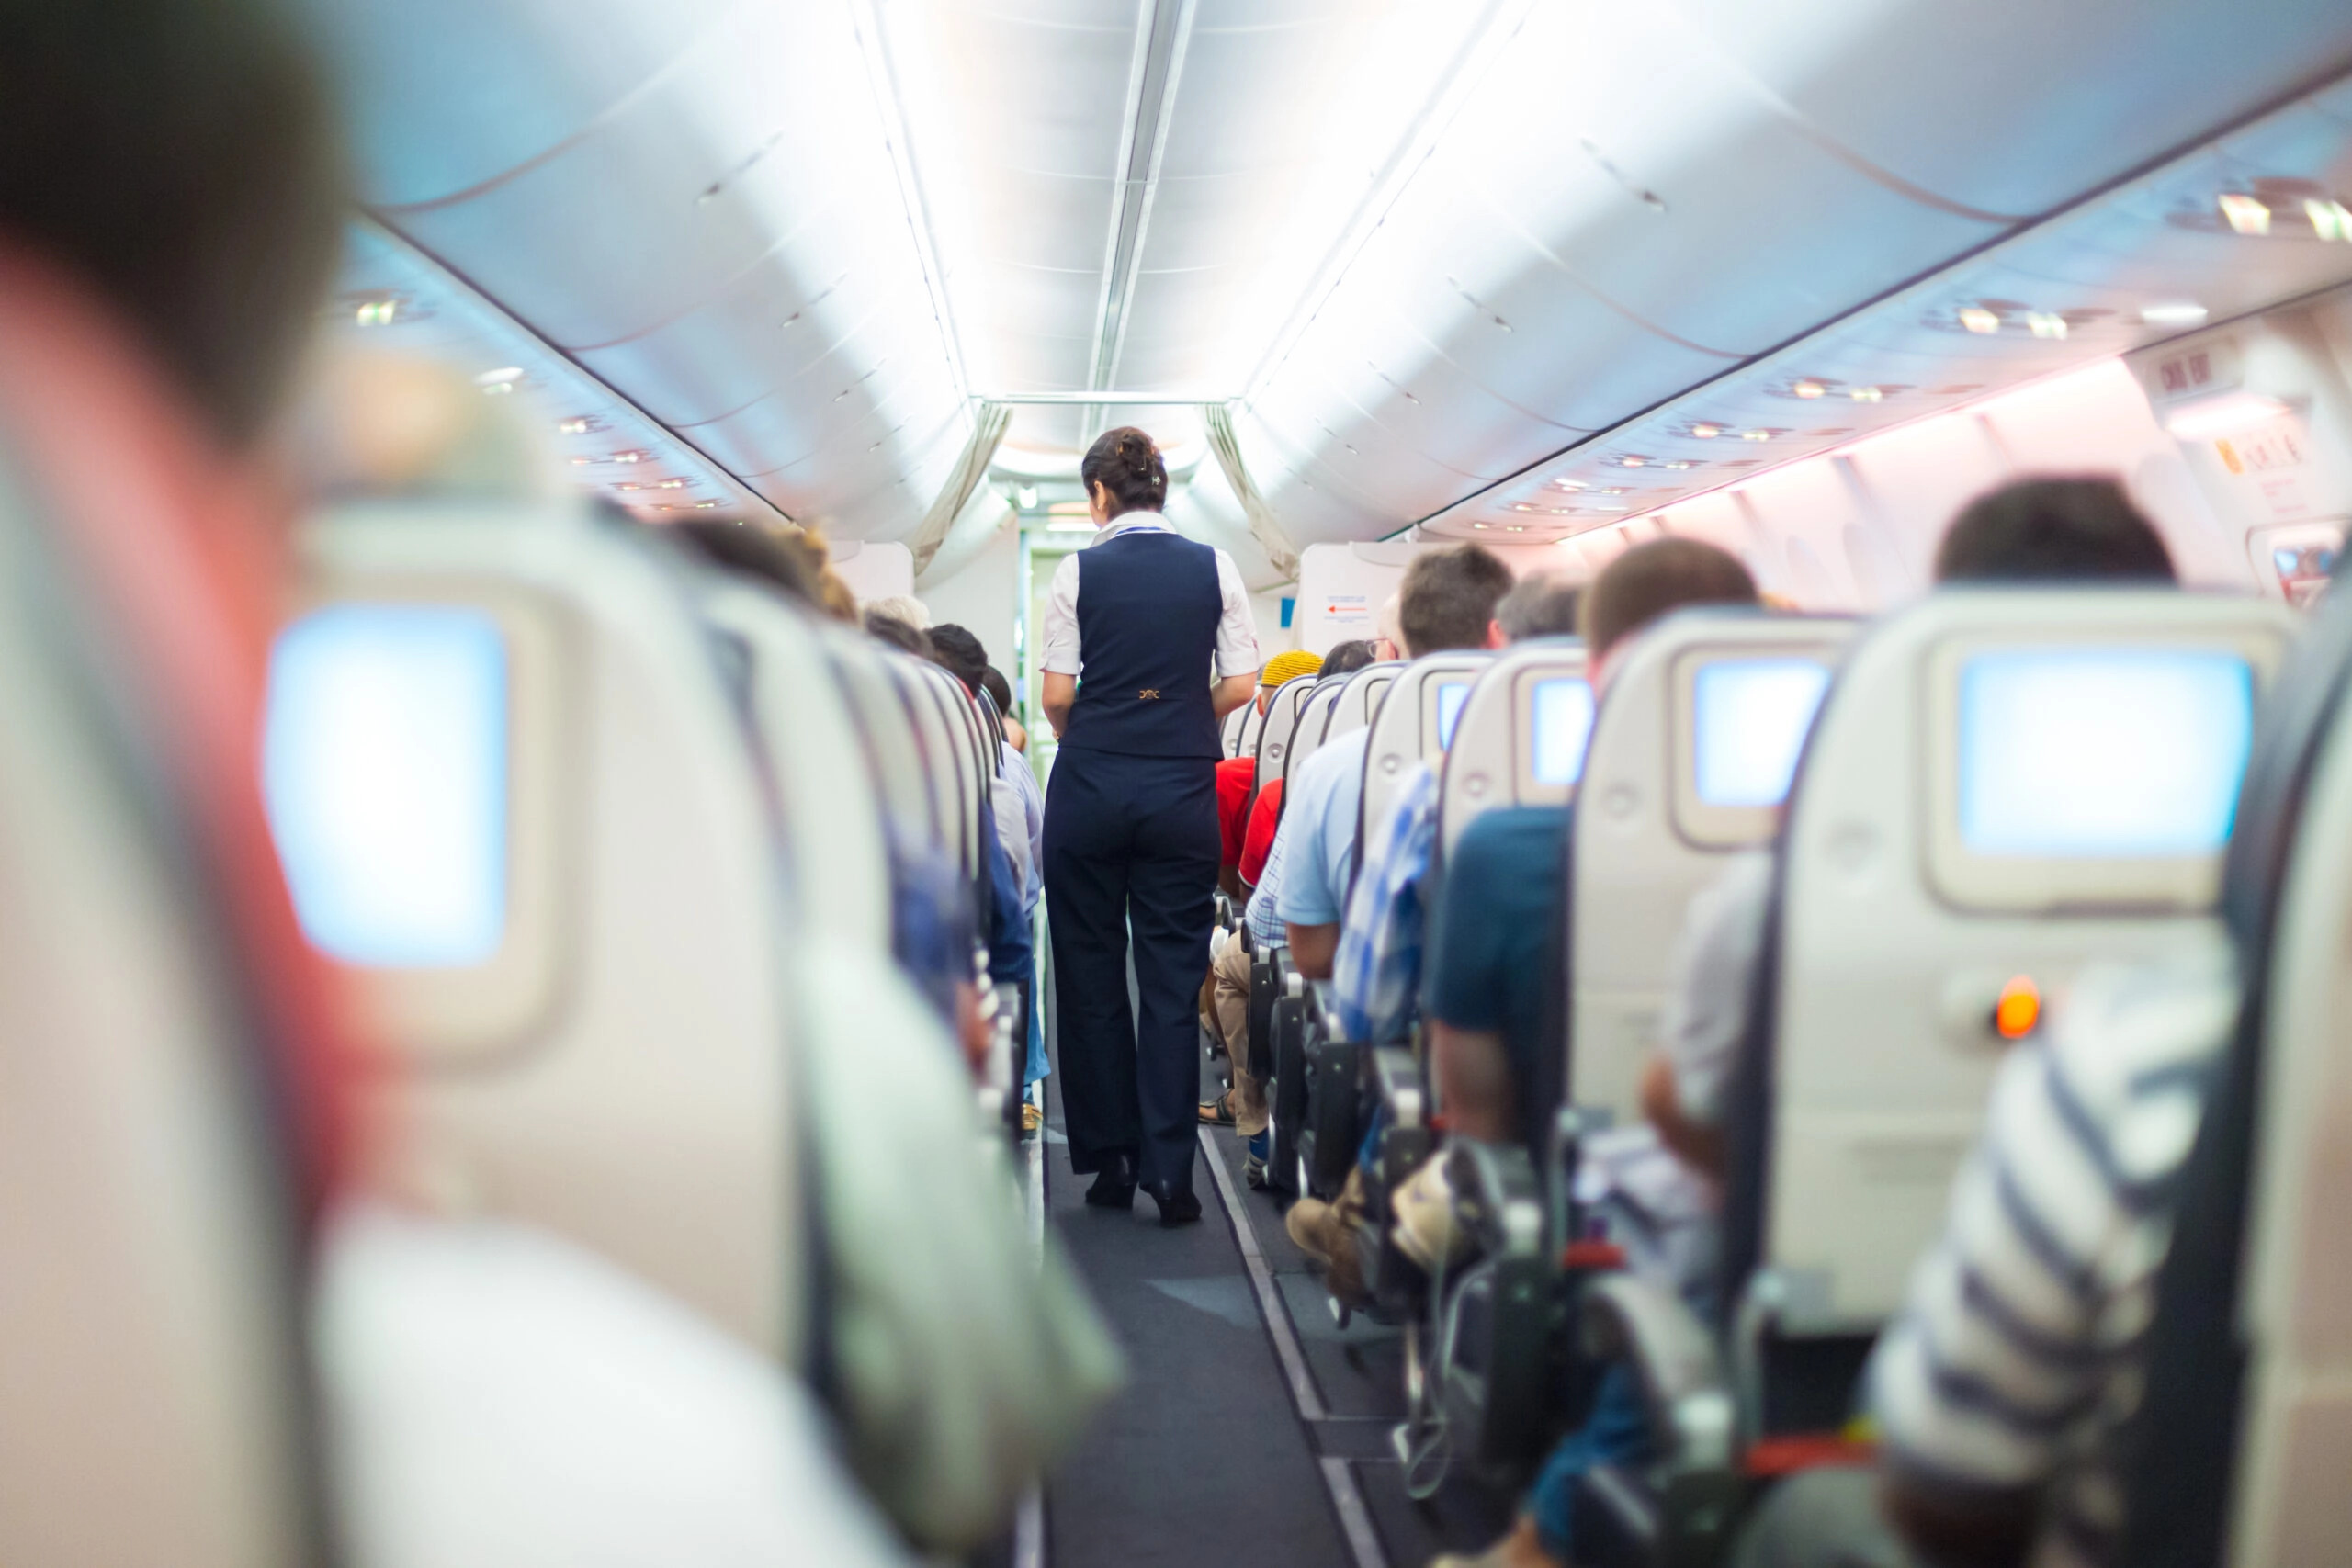 With Rising Popularity, Should Airlines Offer Adults-Only Flights for Travelers?